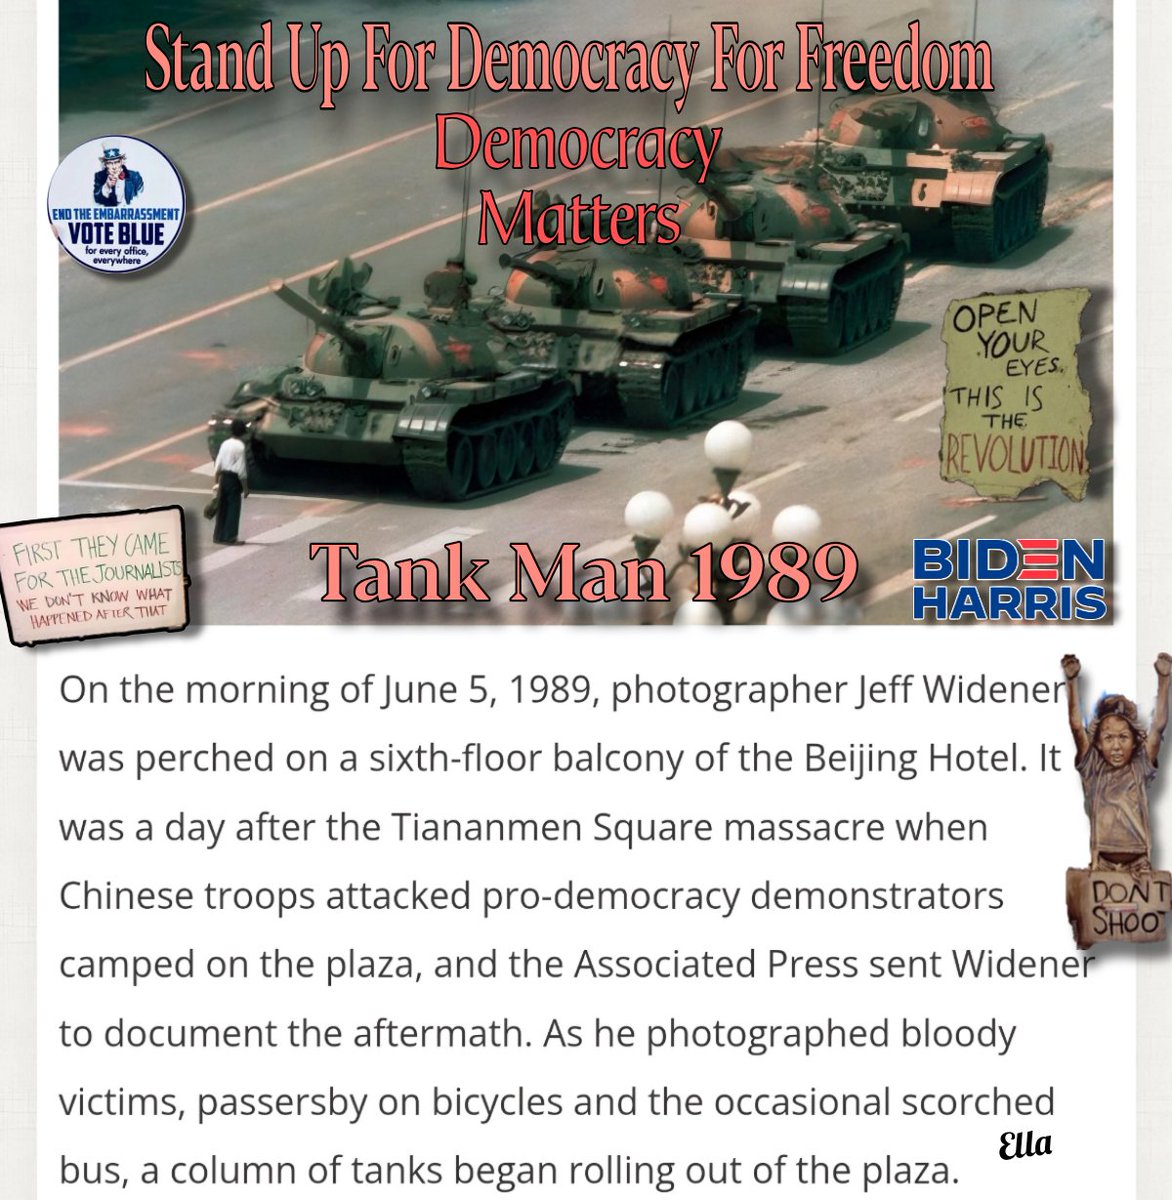 We've posted a lot about WWII though there are many who may not know about #TiananmenSquare in #China when the Young people stood up against the mighty communist. This iconic picture shows a young 'tank man' standing waiting to see what they would do. Not all acts are successful